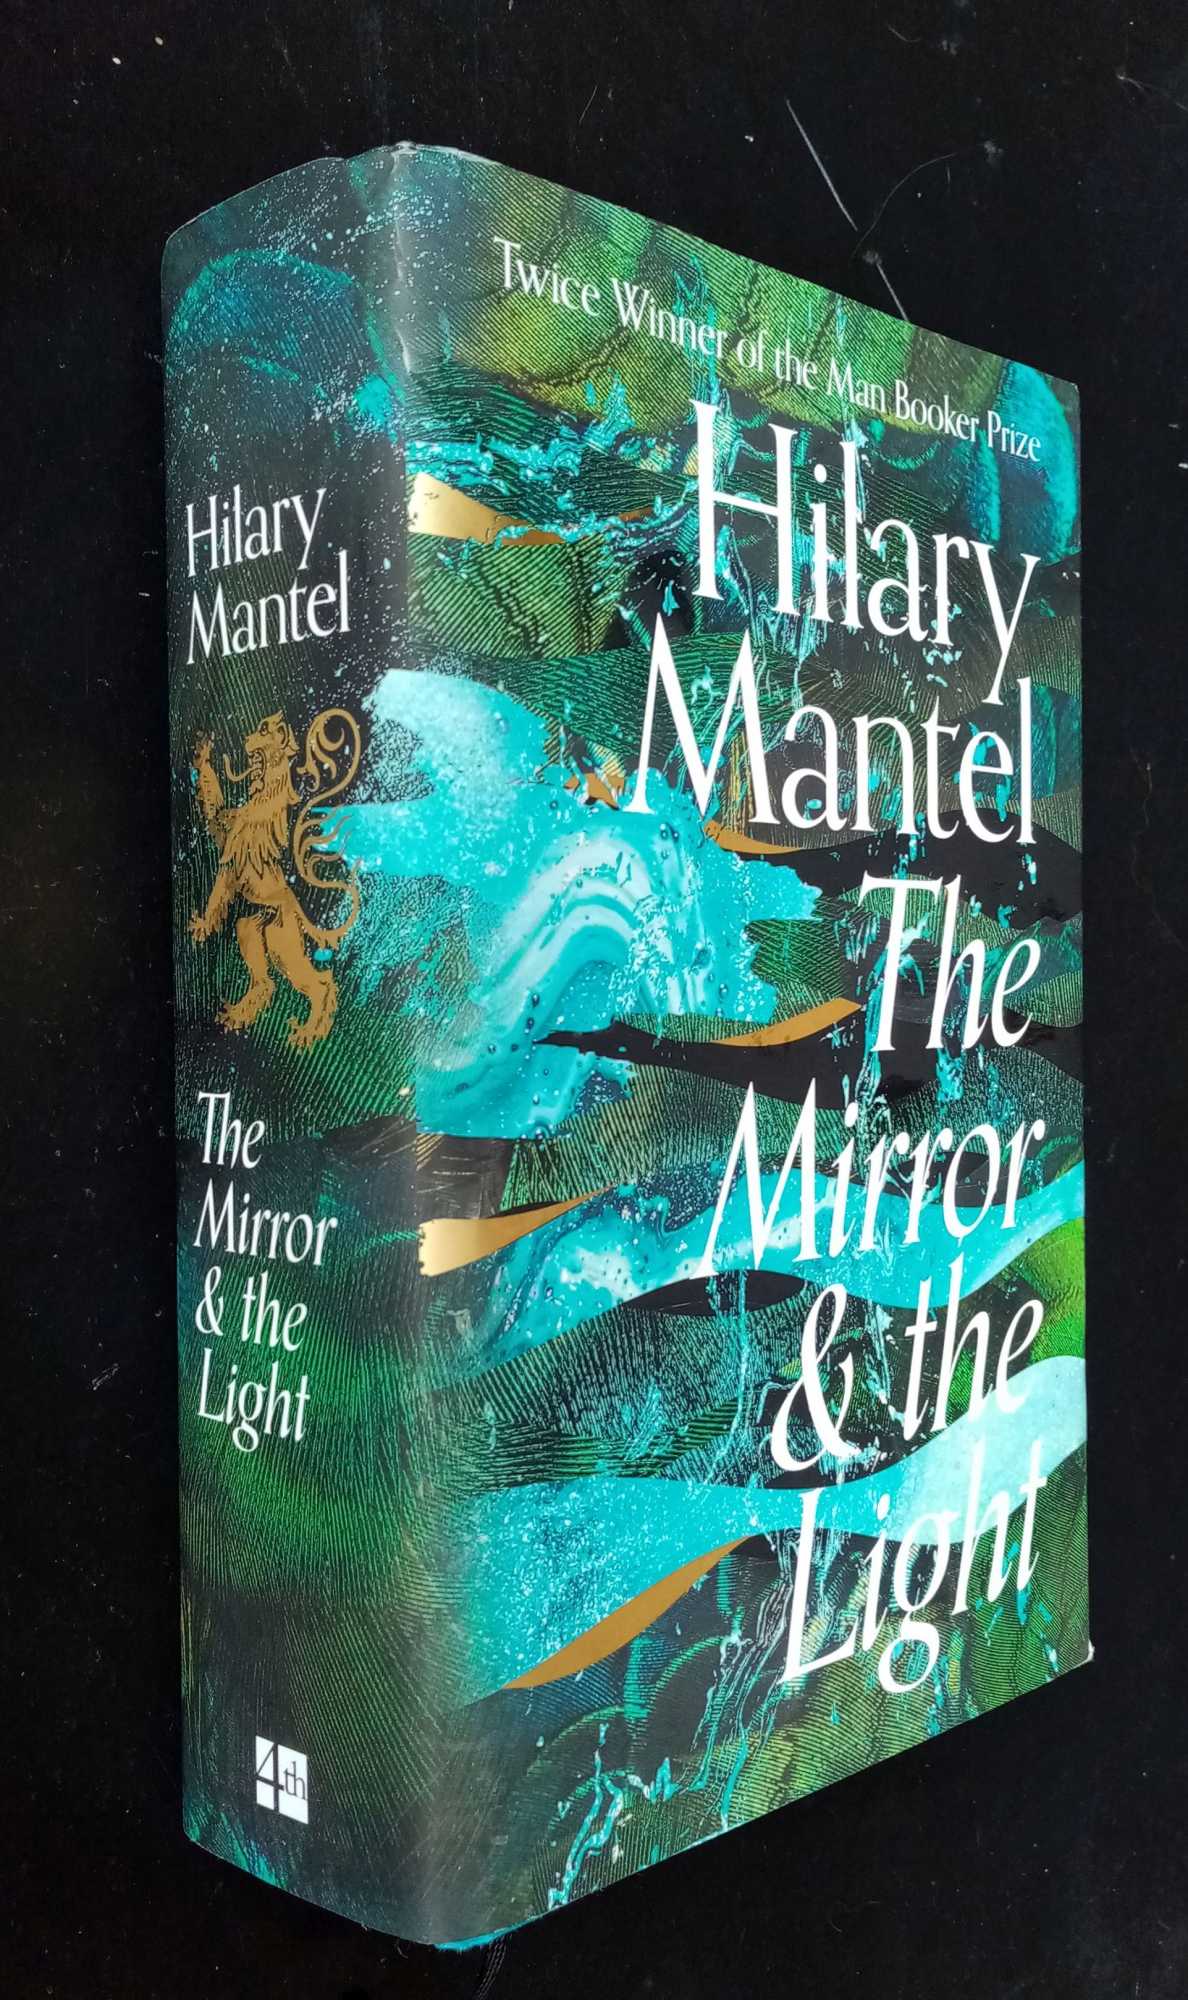 Hilary Mantel - The Mirror and the Light.   